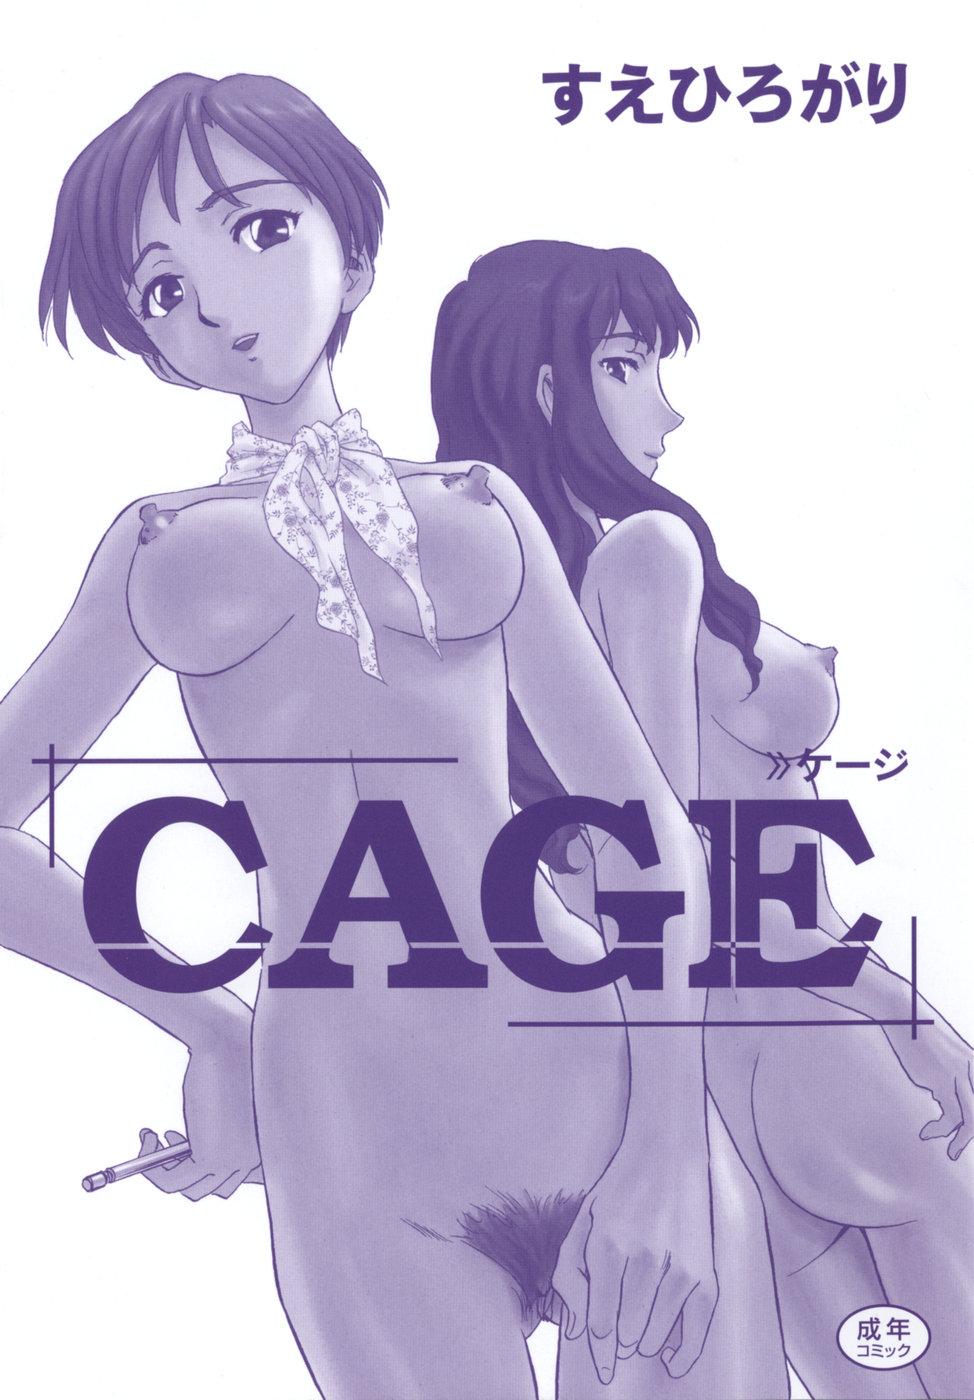 Cage 3